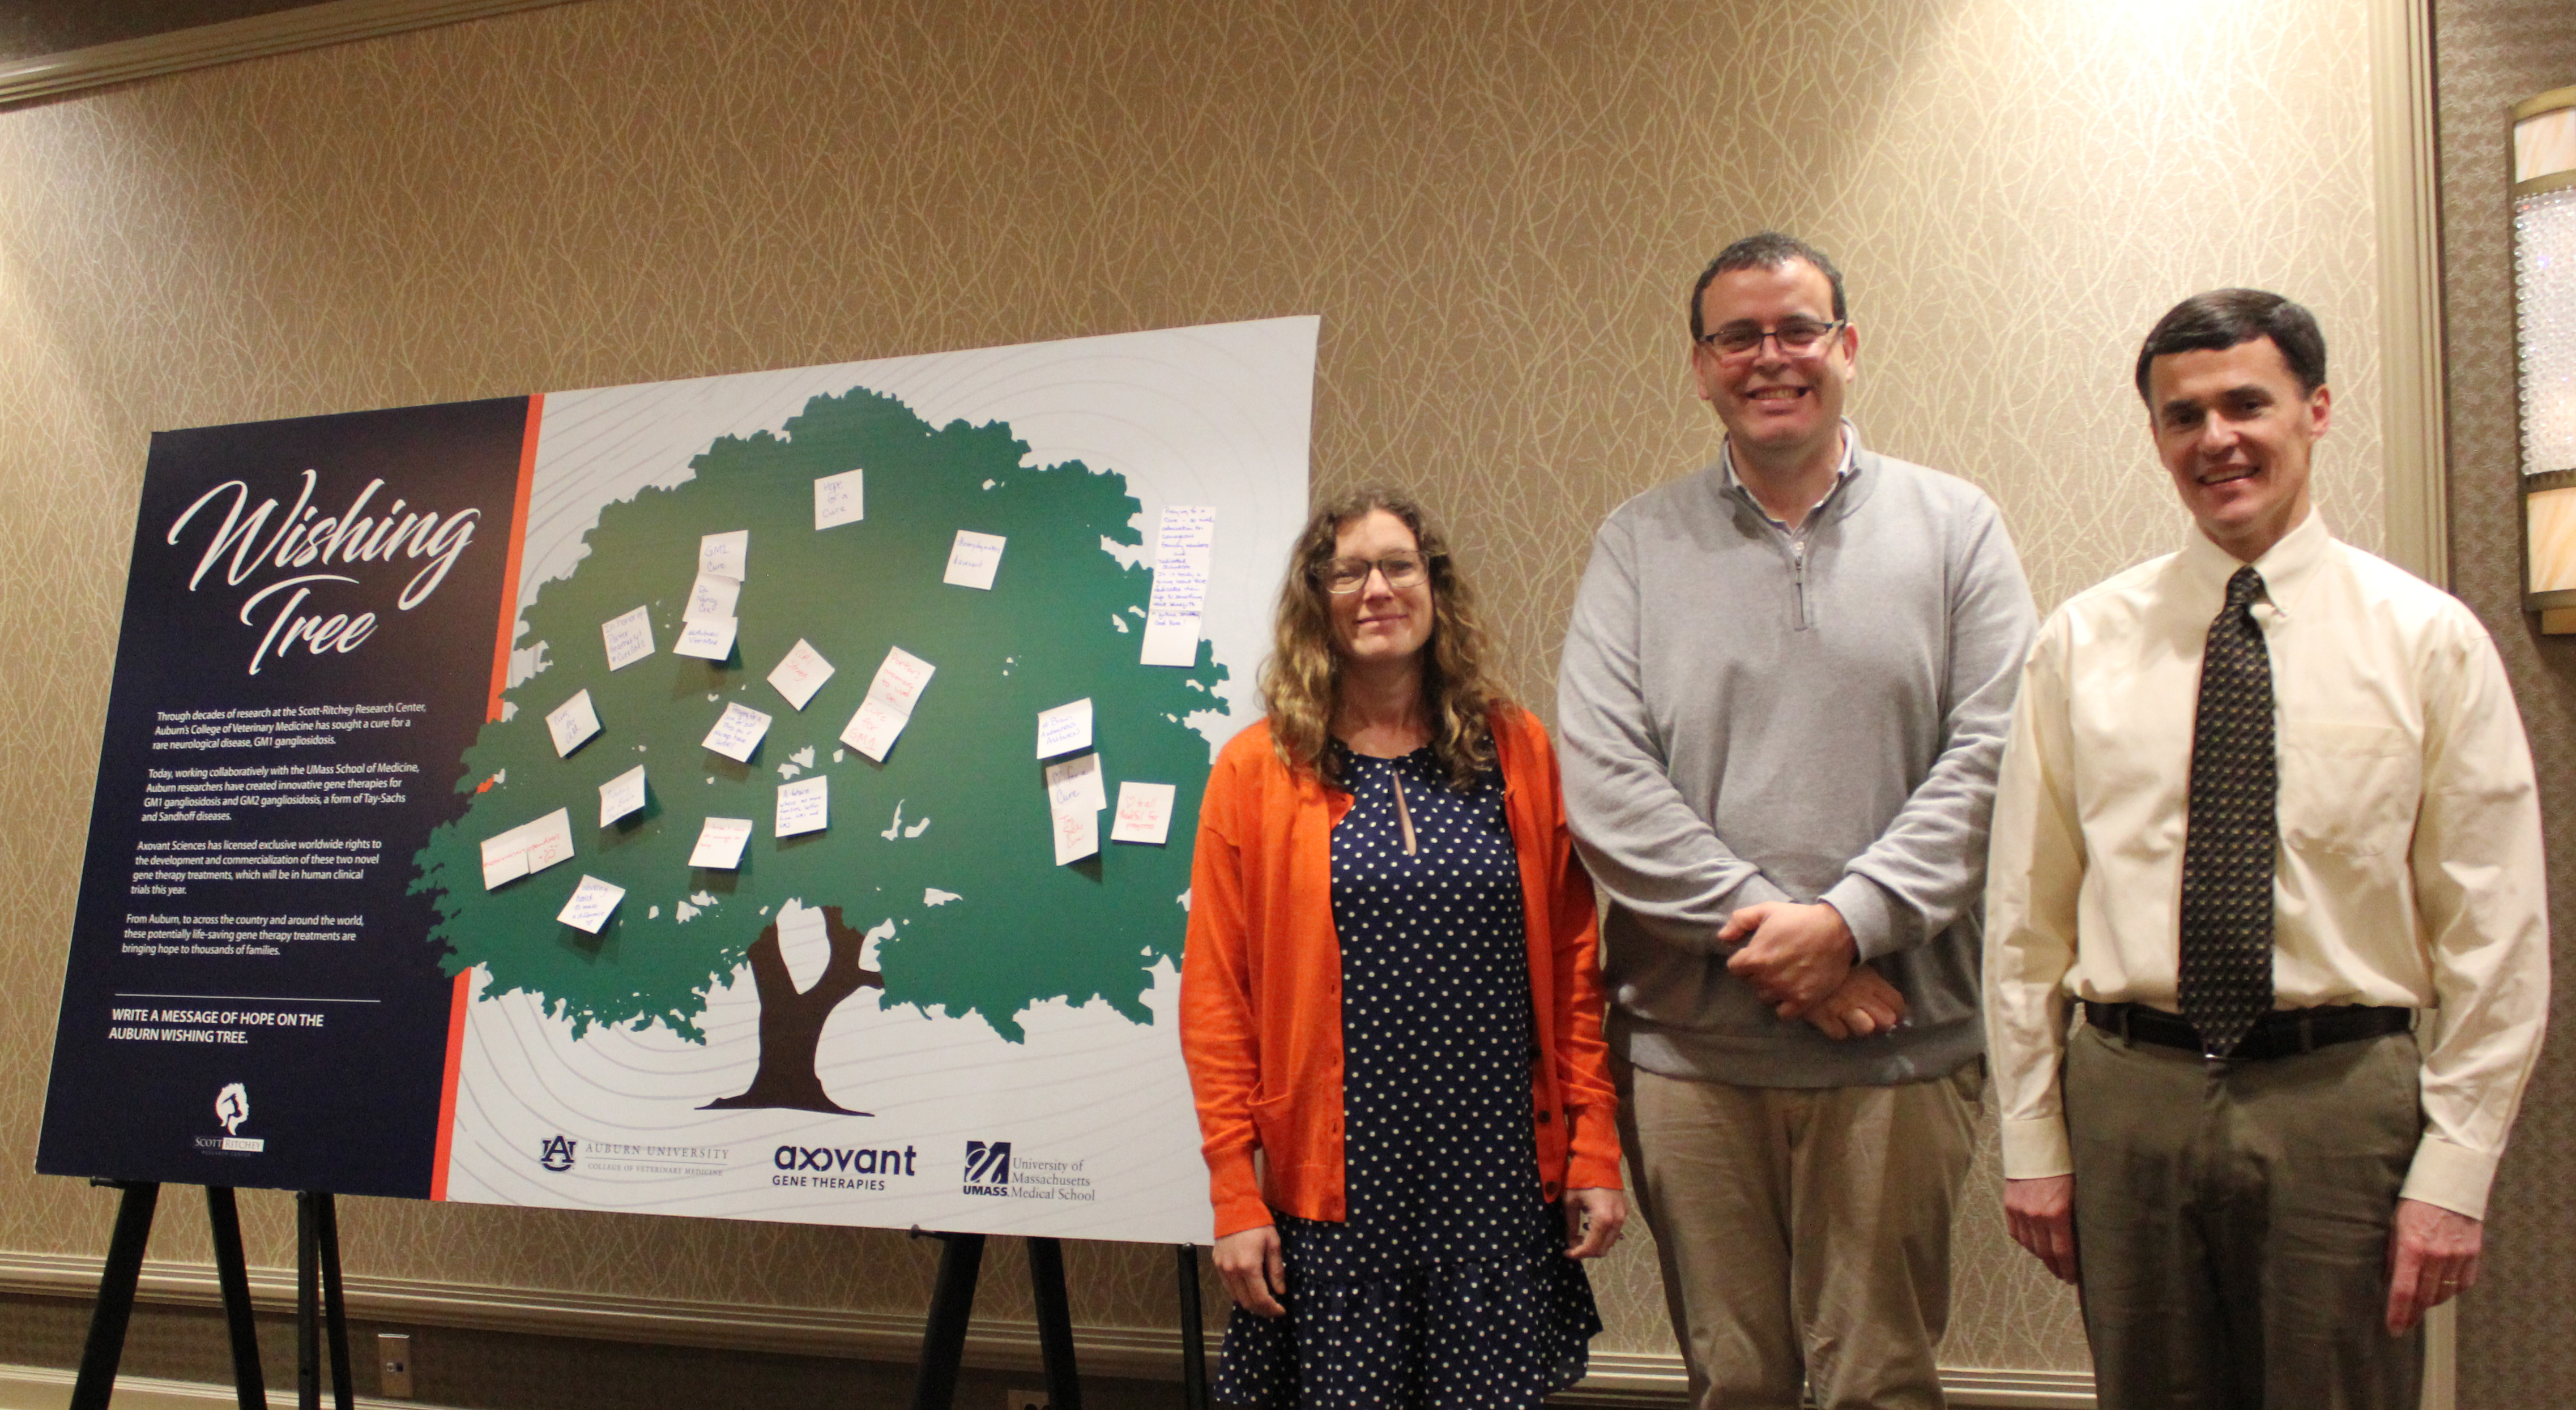 Researchers, from left: Dr. Heather Gray-Edwards, Miguel Sena-Esteves and Doug Martin at a GM1 event in Auburn last March.